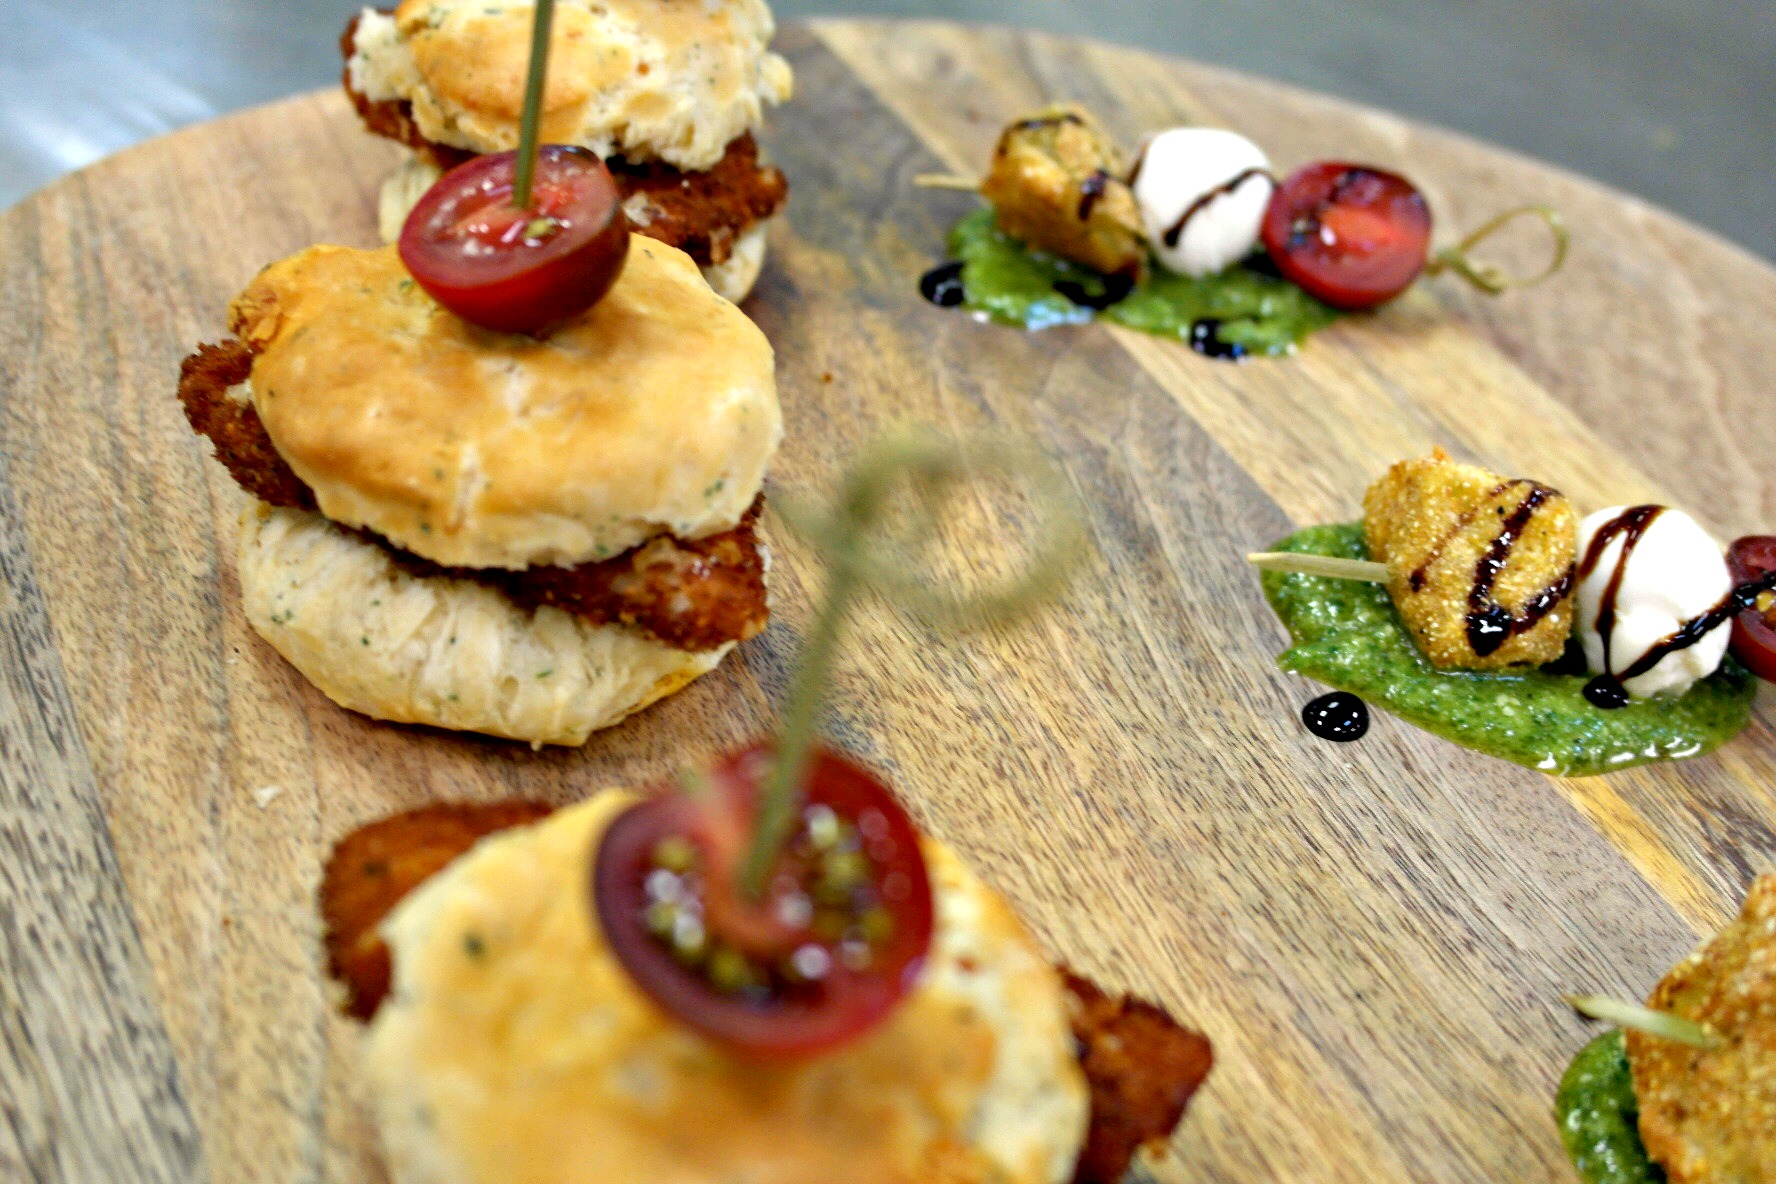 Italian Chicken & Biscuit with Tomato Jam